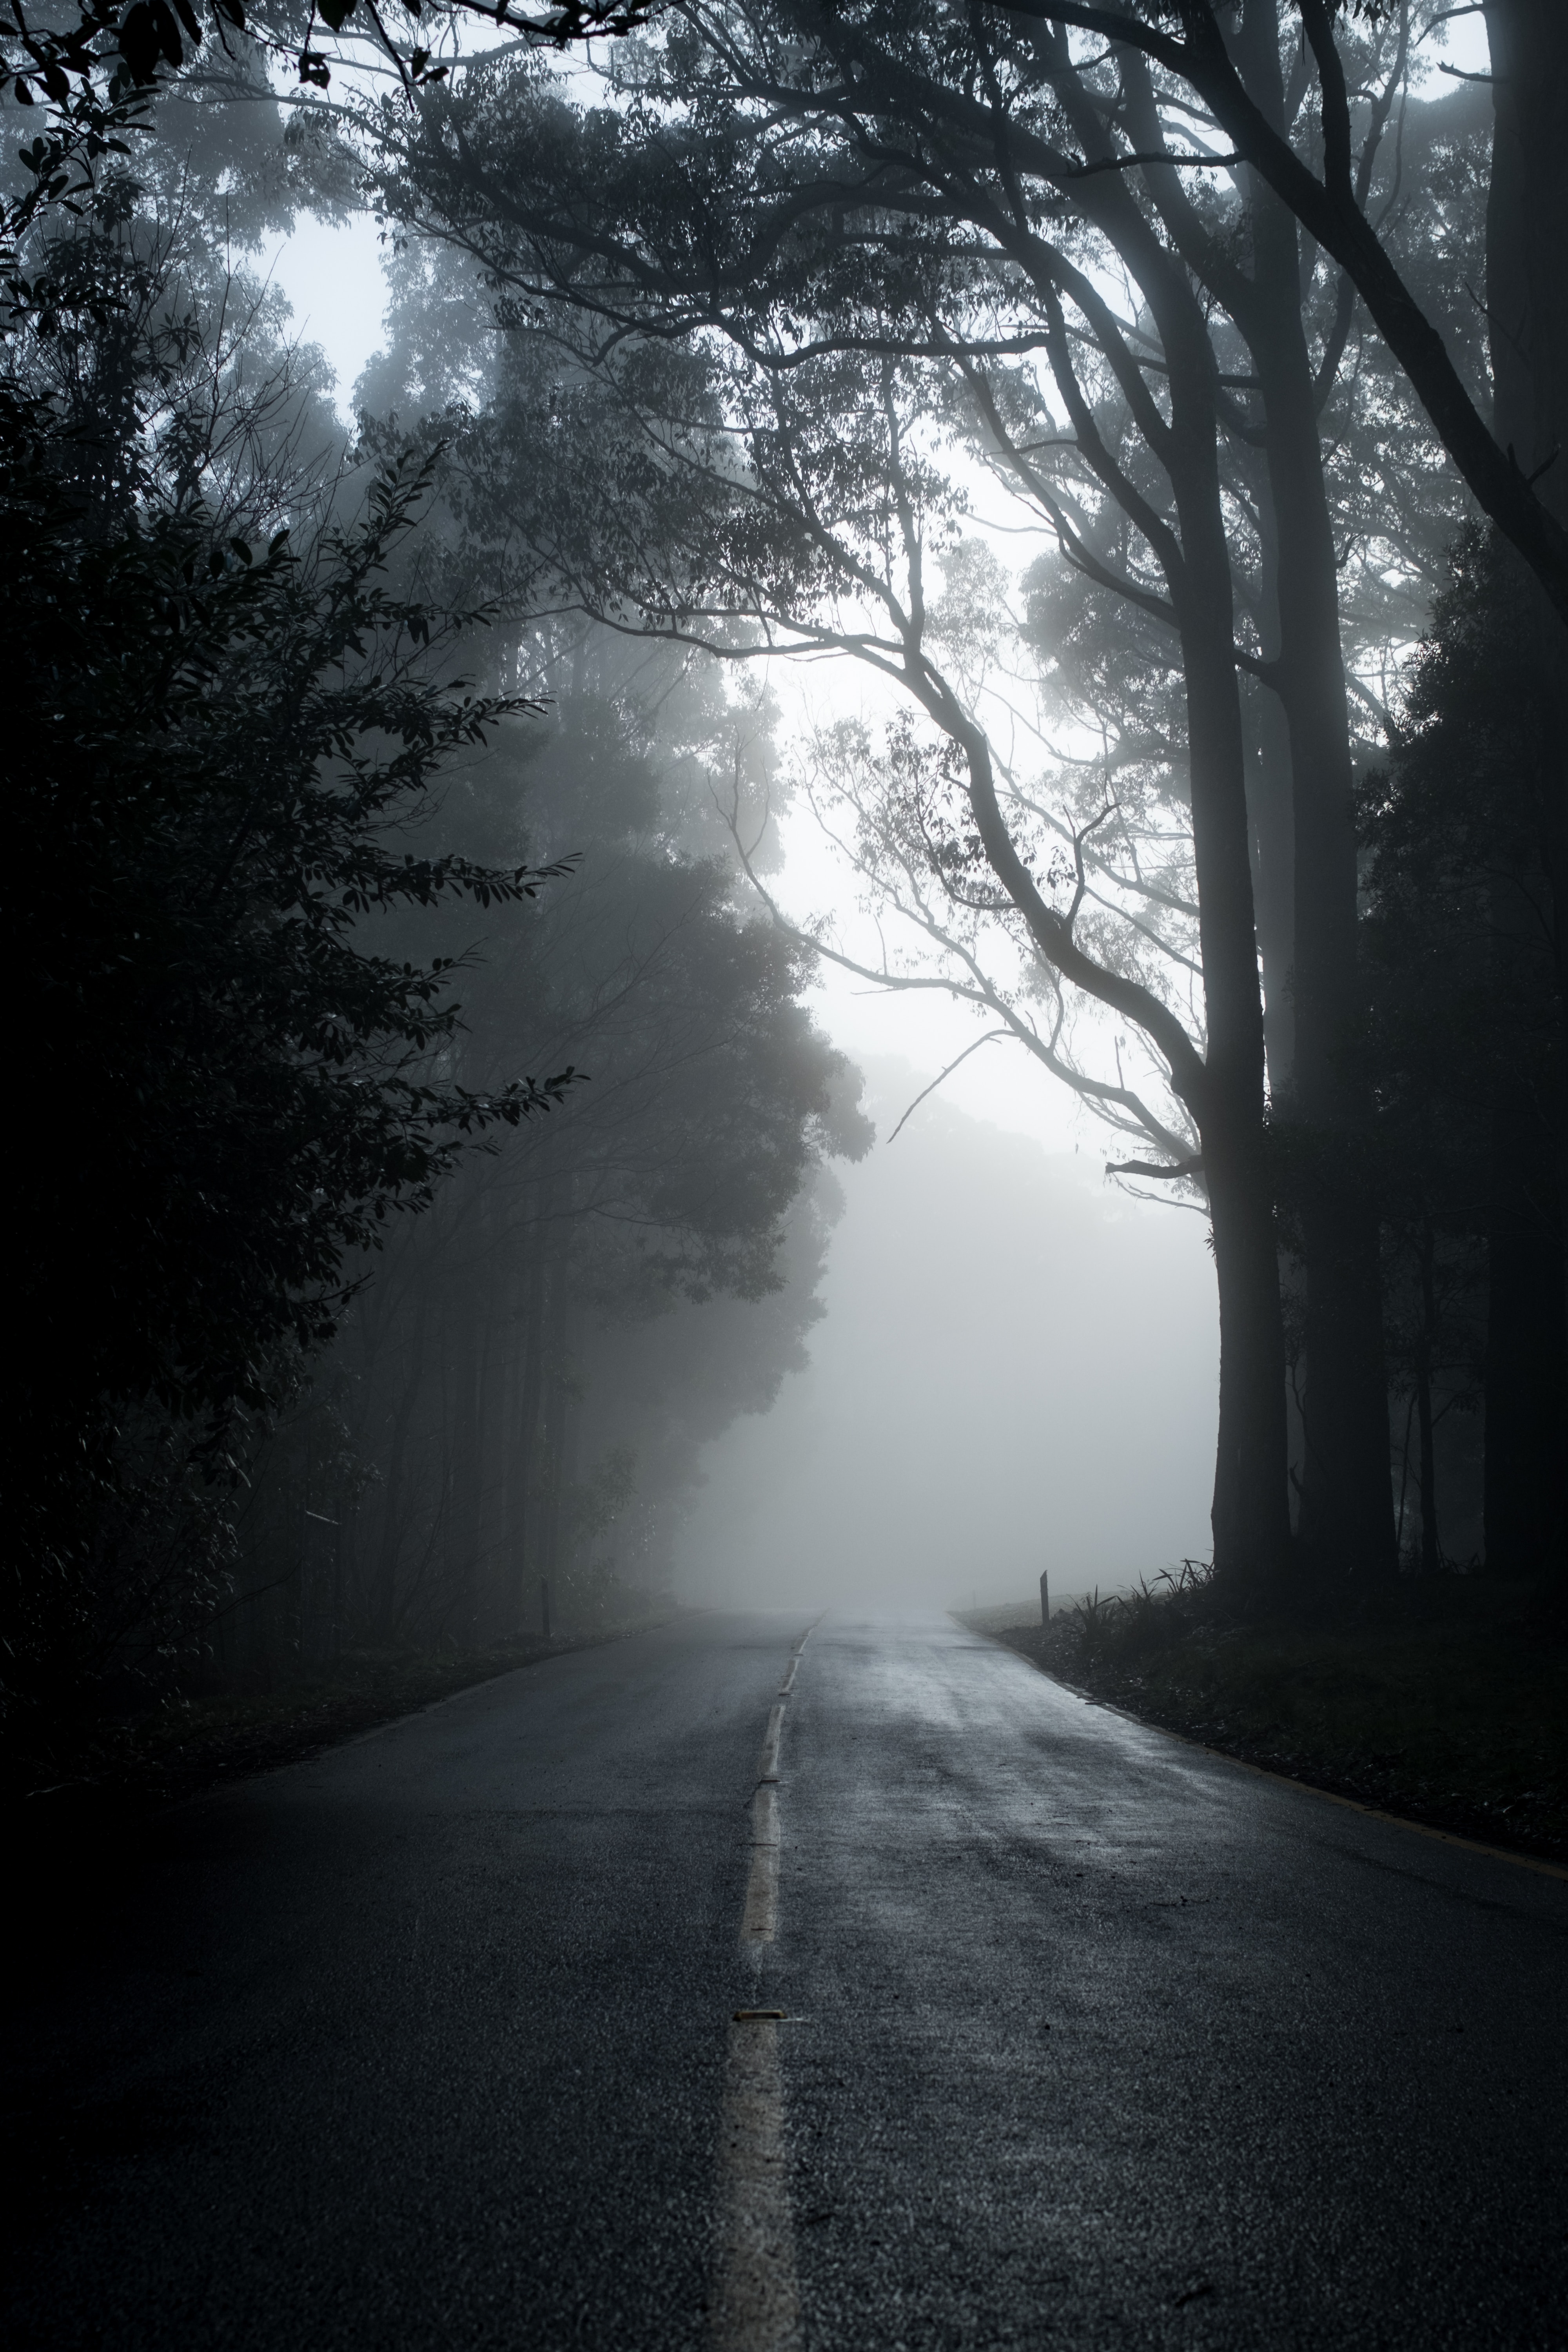 Black and white photo of a foggy tree-lined road